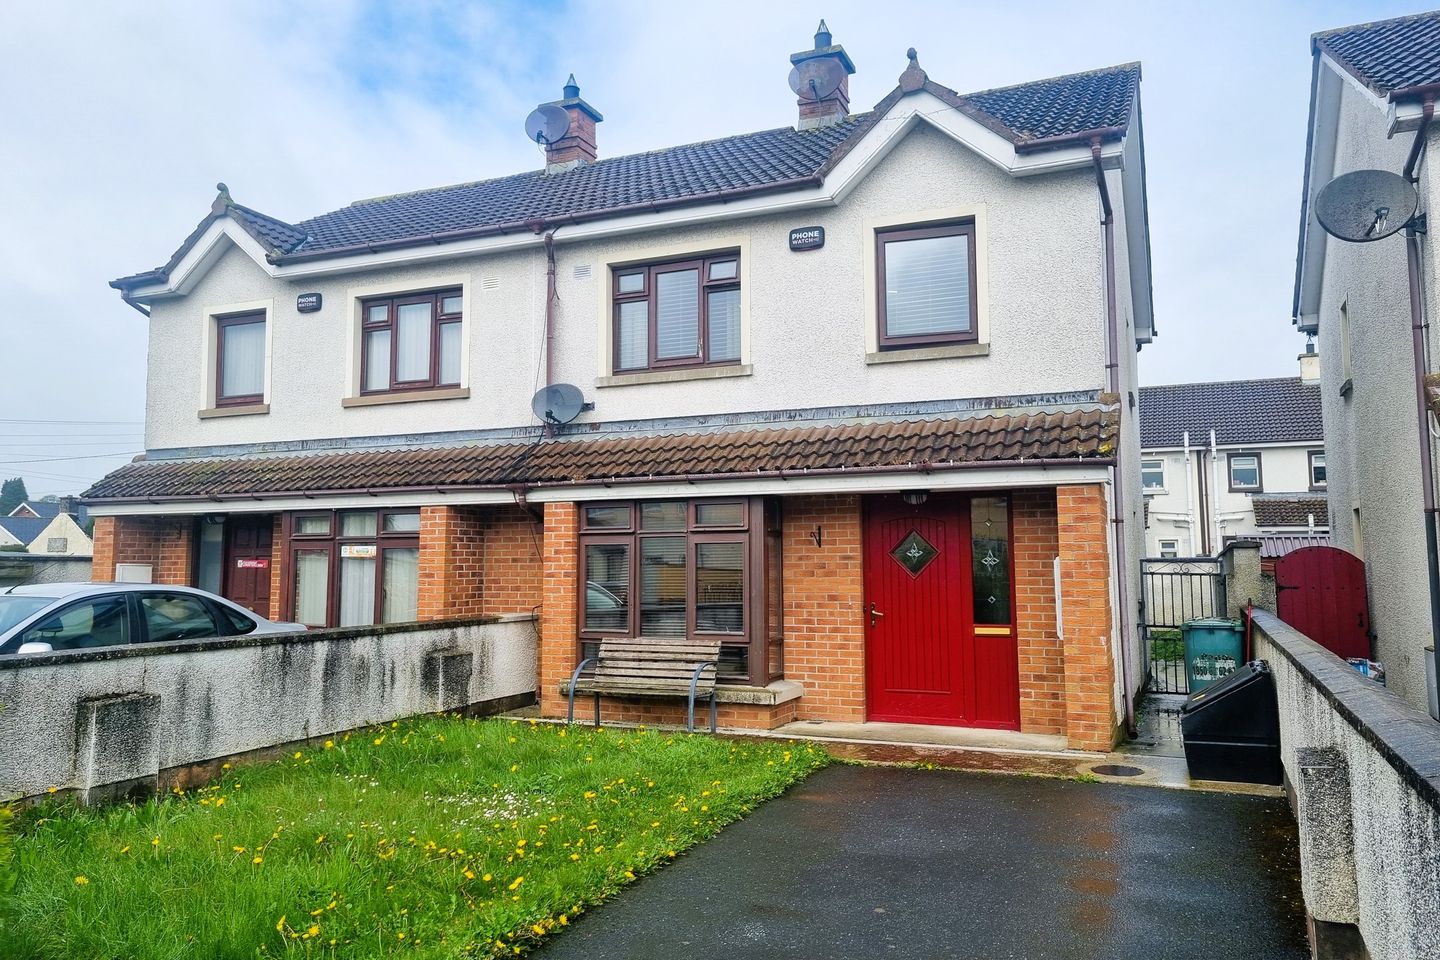 2 Cappocks Gate, Ardee, Co. Louth, A92Y5T7